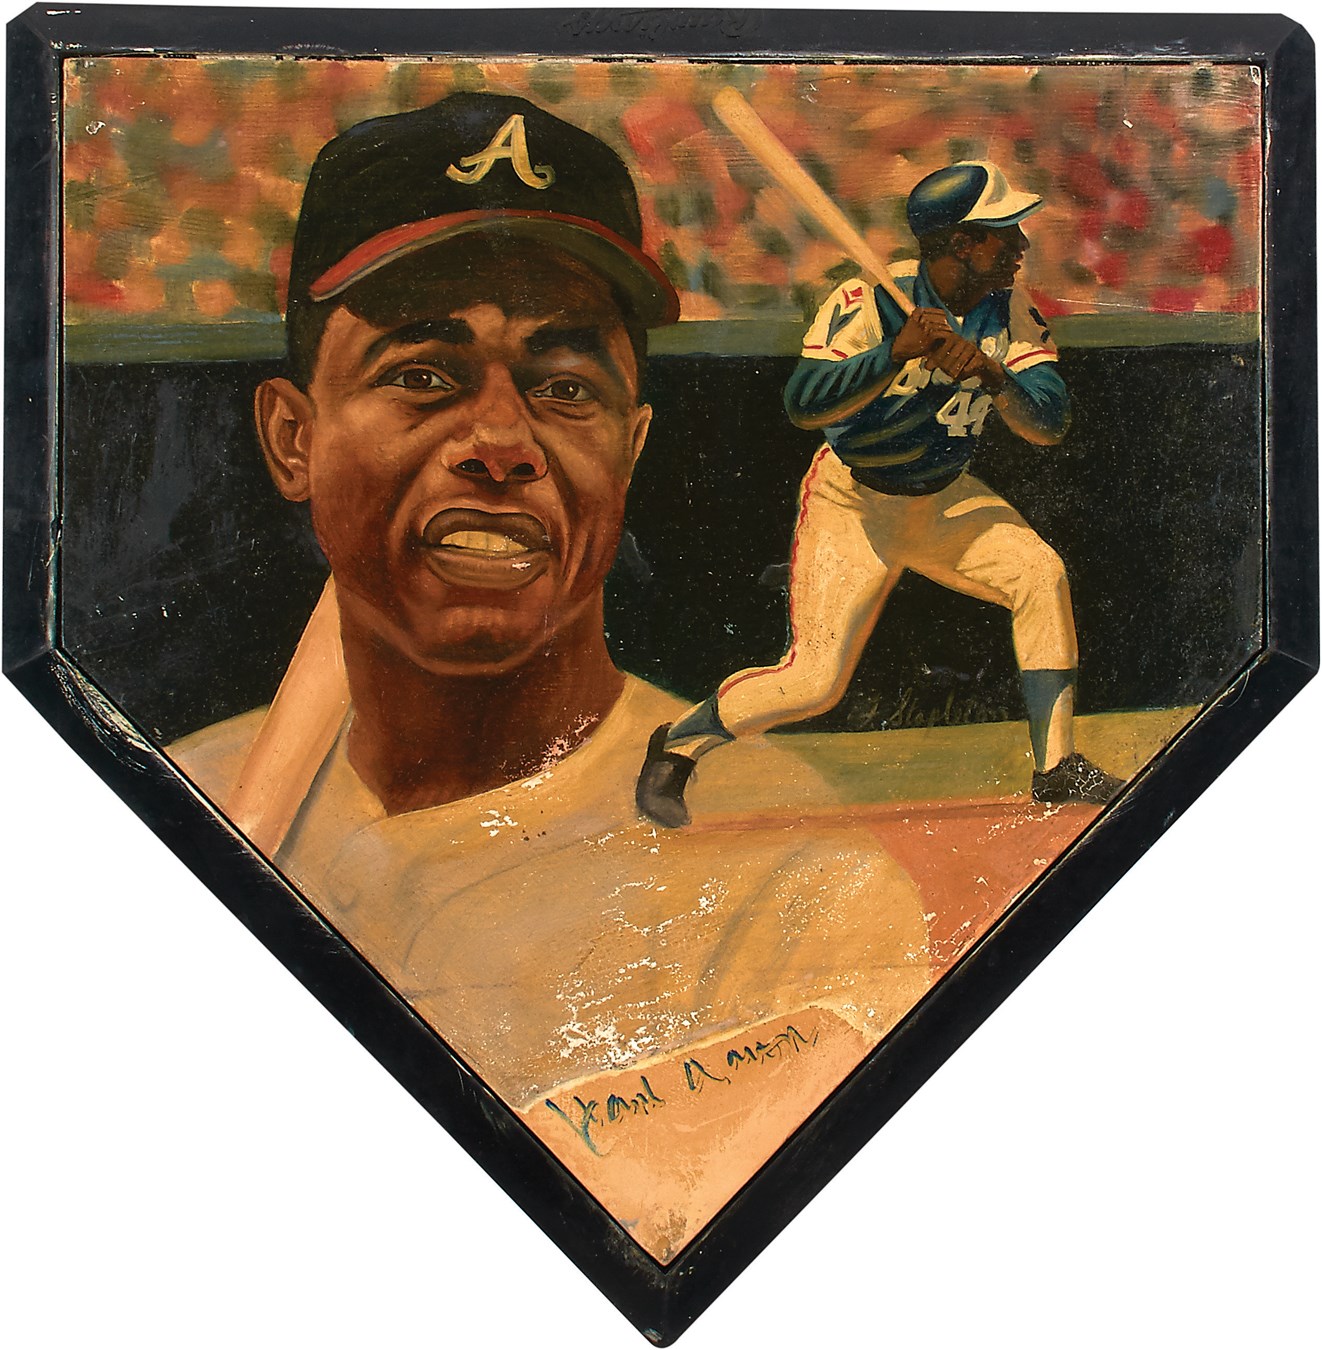 - Hank Aaron Signed Oil Painting on Home Plate by Frank Stapleton (JSA)